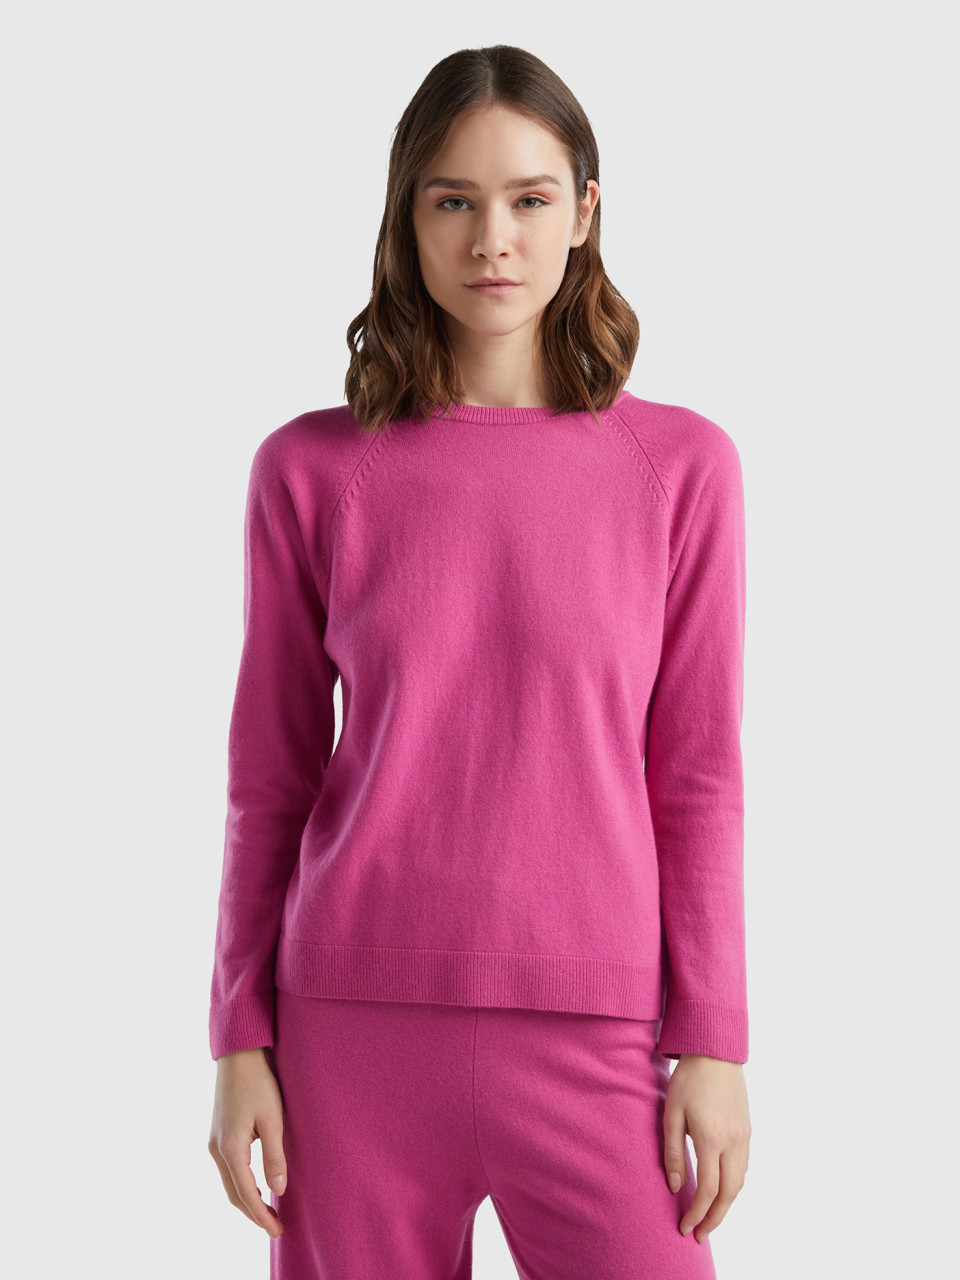 Benetton, Pink Crew Neck Sweater In Cashmere And Wool Blend, Pink, Women